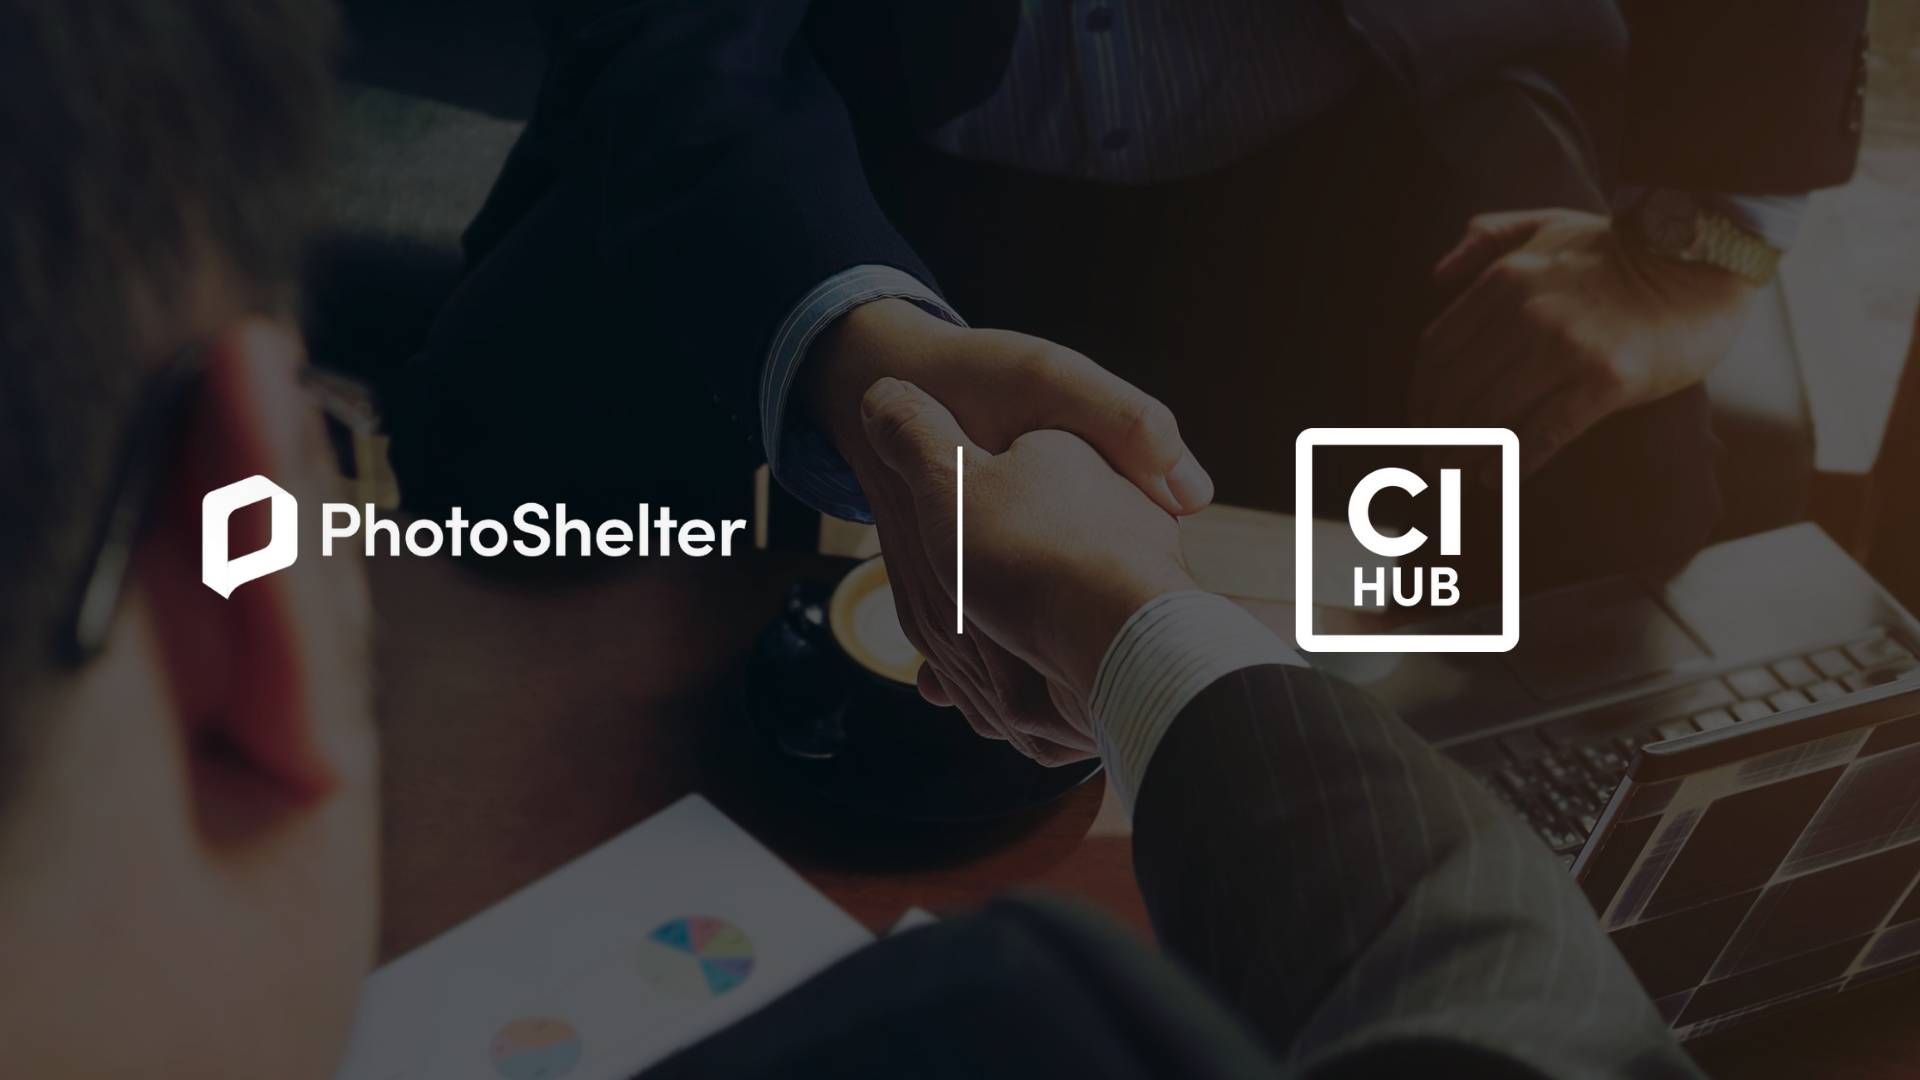 PhotoShelter Launches New Integrations with CI HUB to Boost Workflow Efficiency